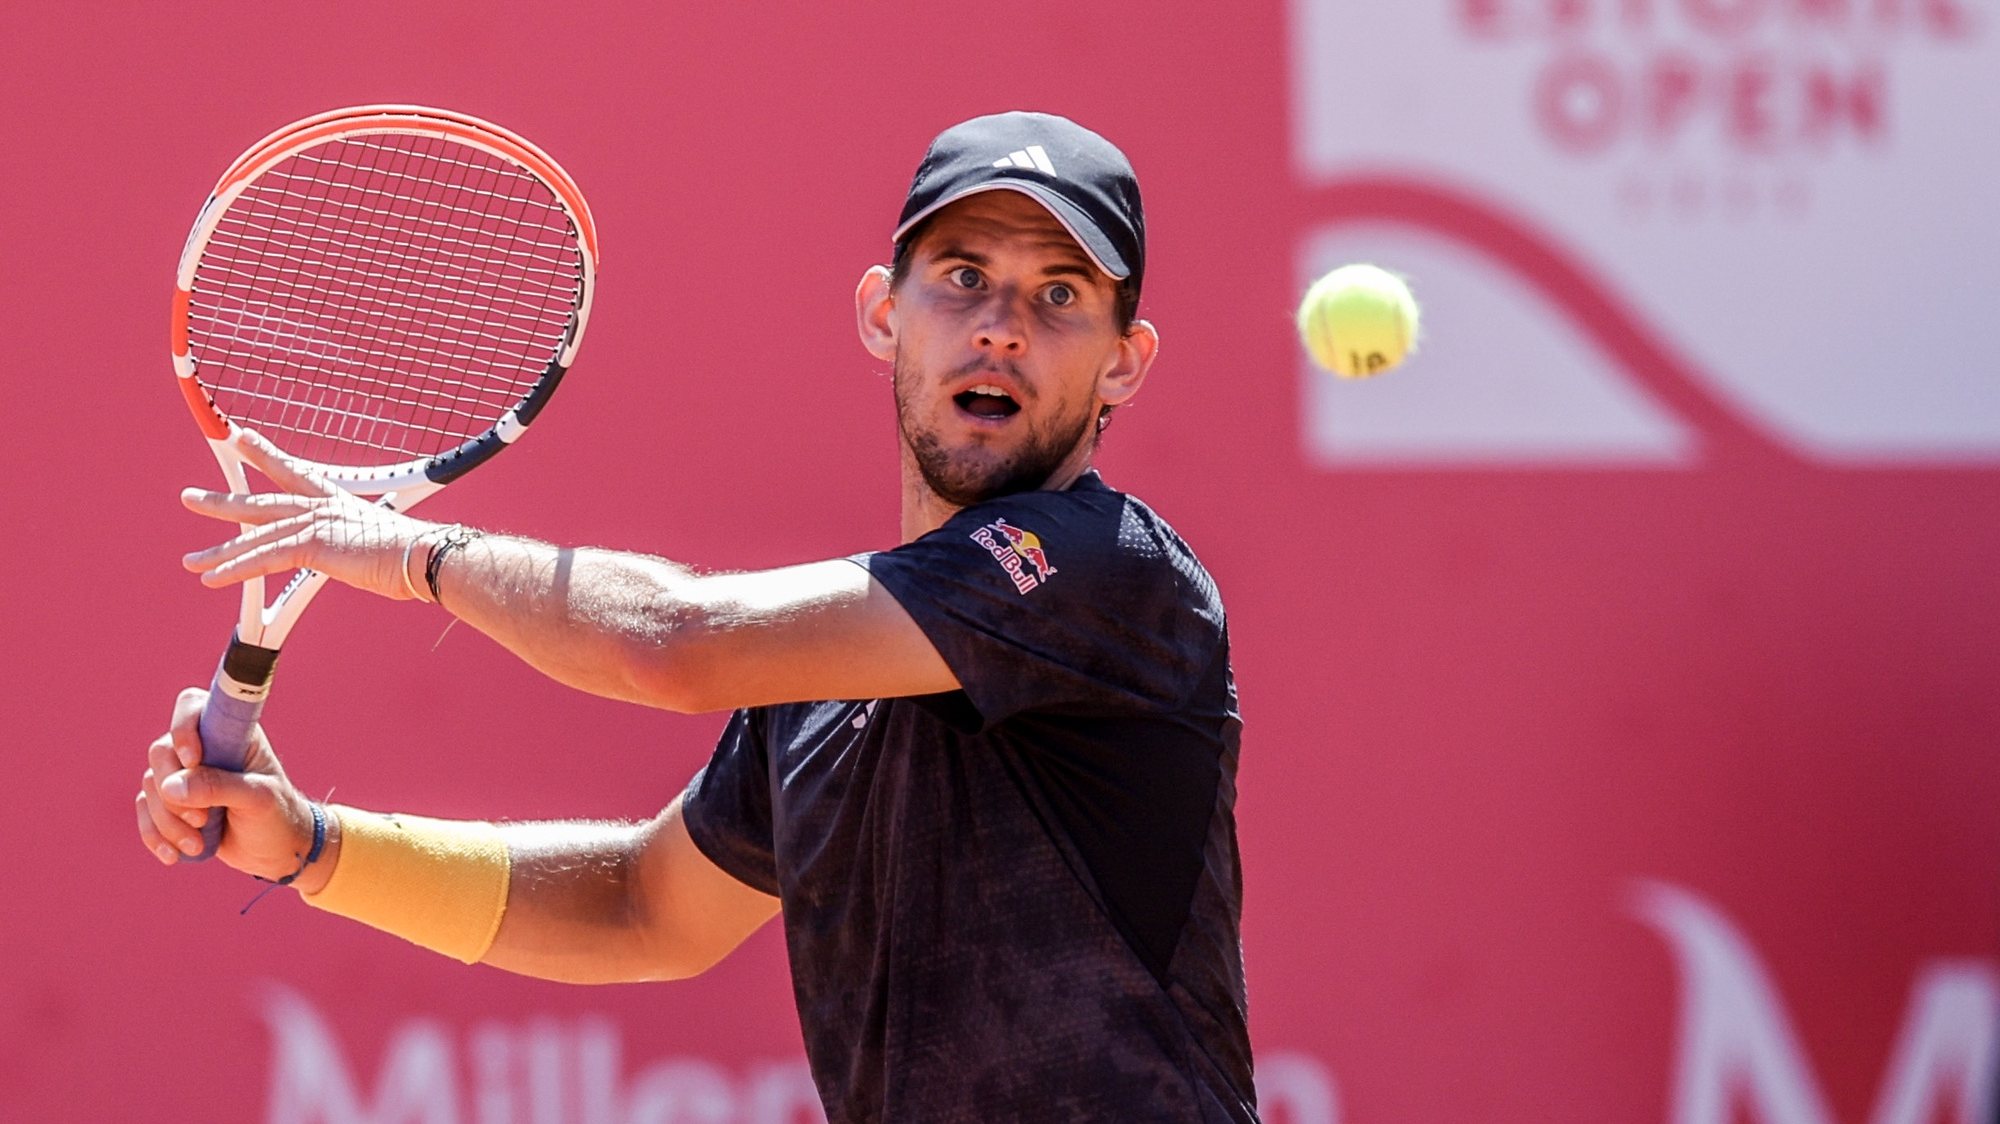 Dominic Thiem from Austria in action against Ben Shelton from United States of America in the round of 16 match at the Estoril Open Tennis tournament in Estoril, on the outskirts of Lisbon, Portugal, 06 of April 2023. MIGUEL A. LOPES/LUSA